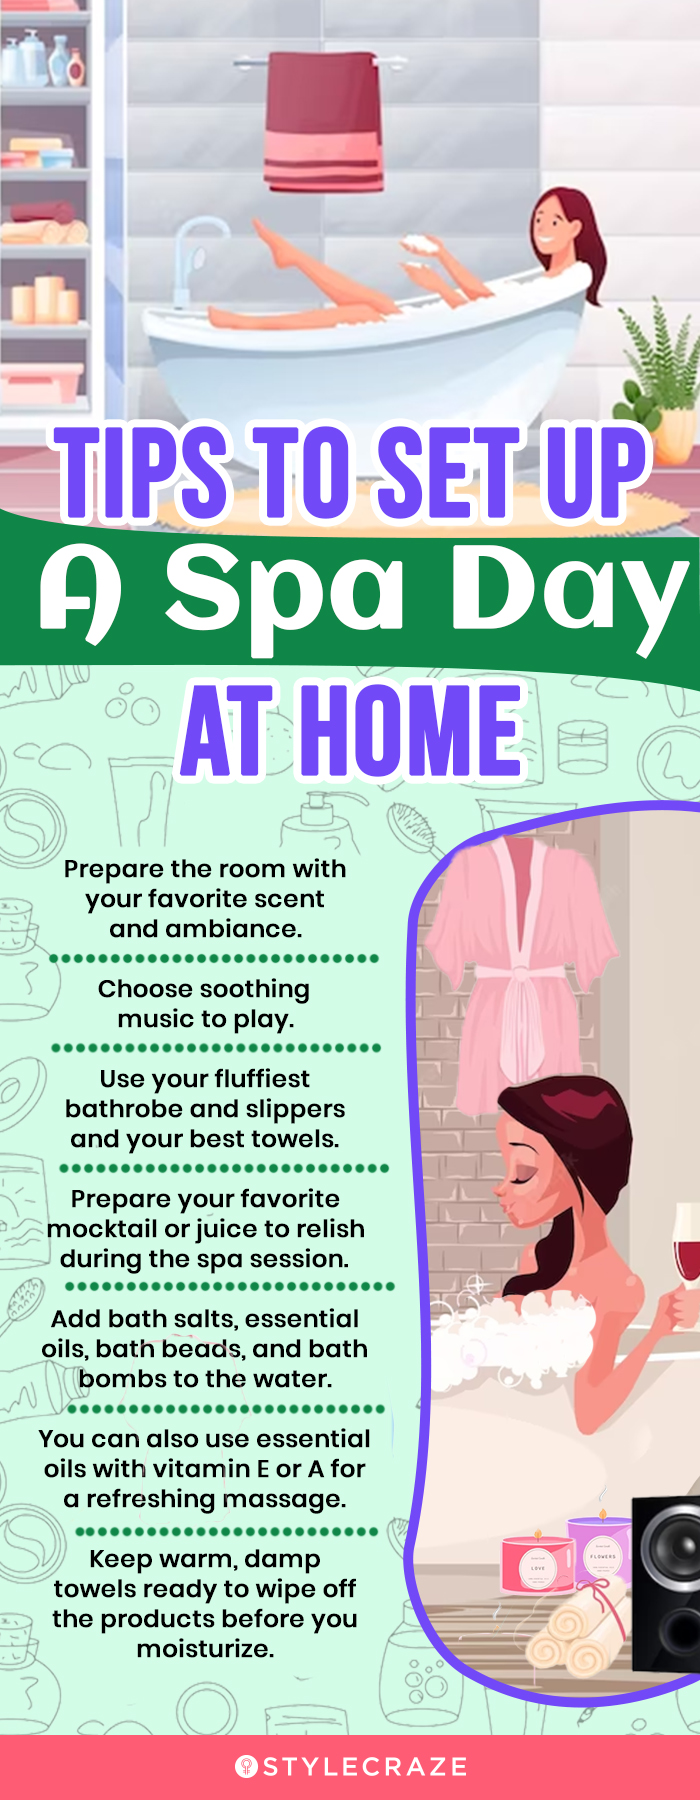 Tips To Set Up A Spa Day At Home (infographic)